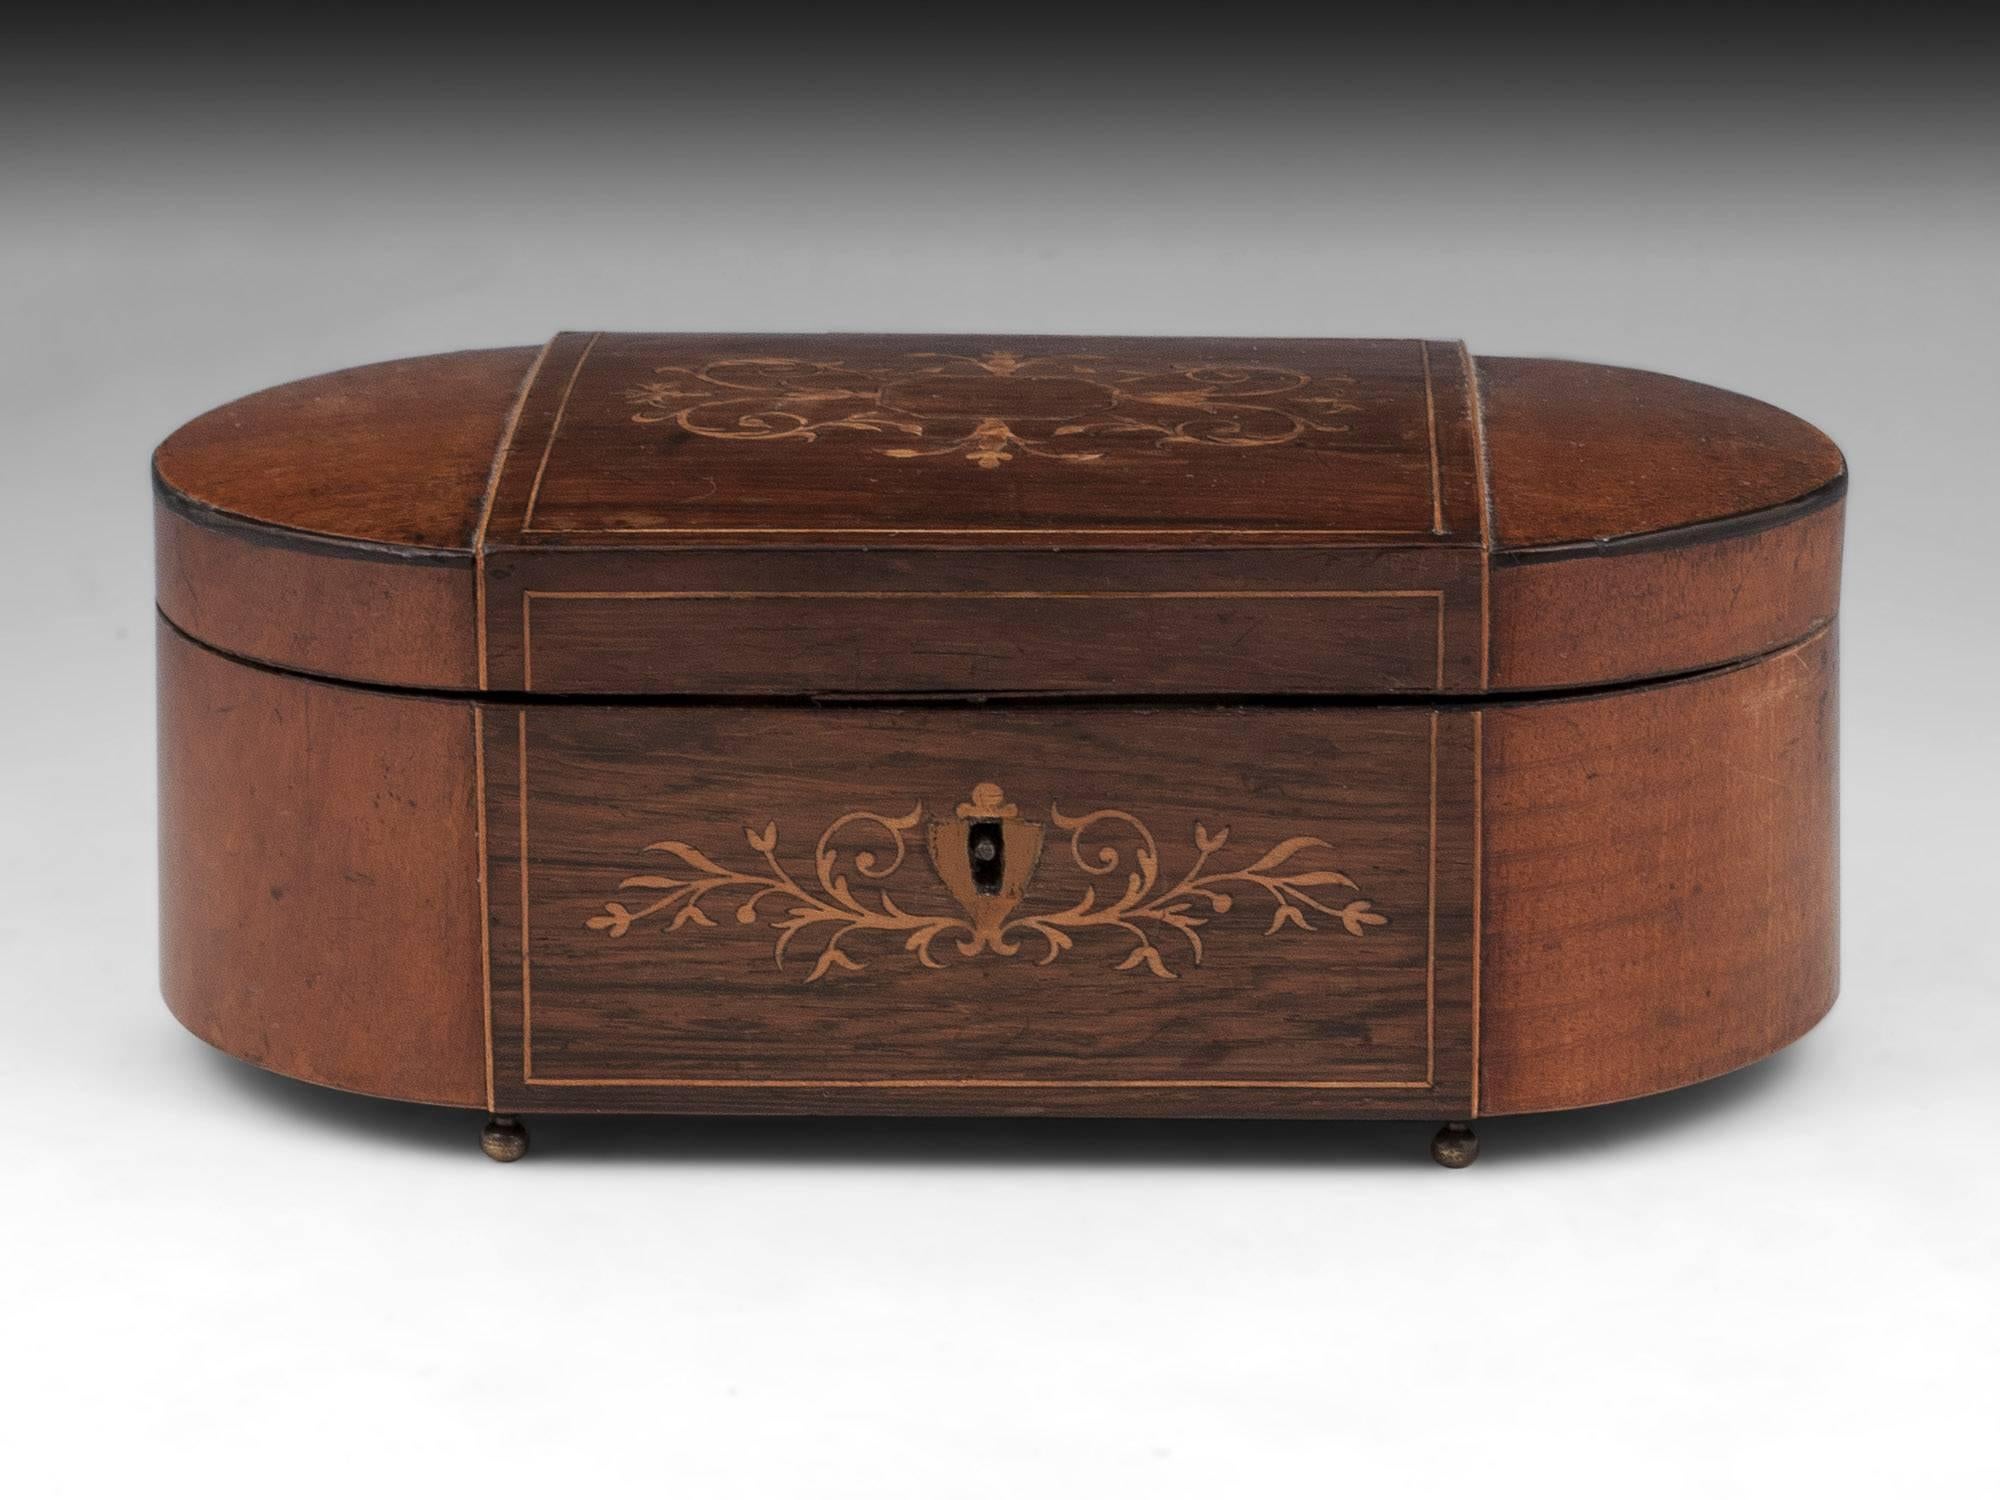 George IV Antique Mahogany Sycamore Palais Royal Sewing Box, French, 19th Century For Sale